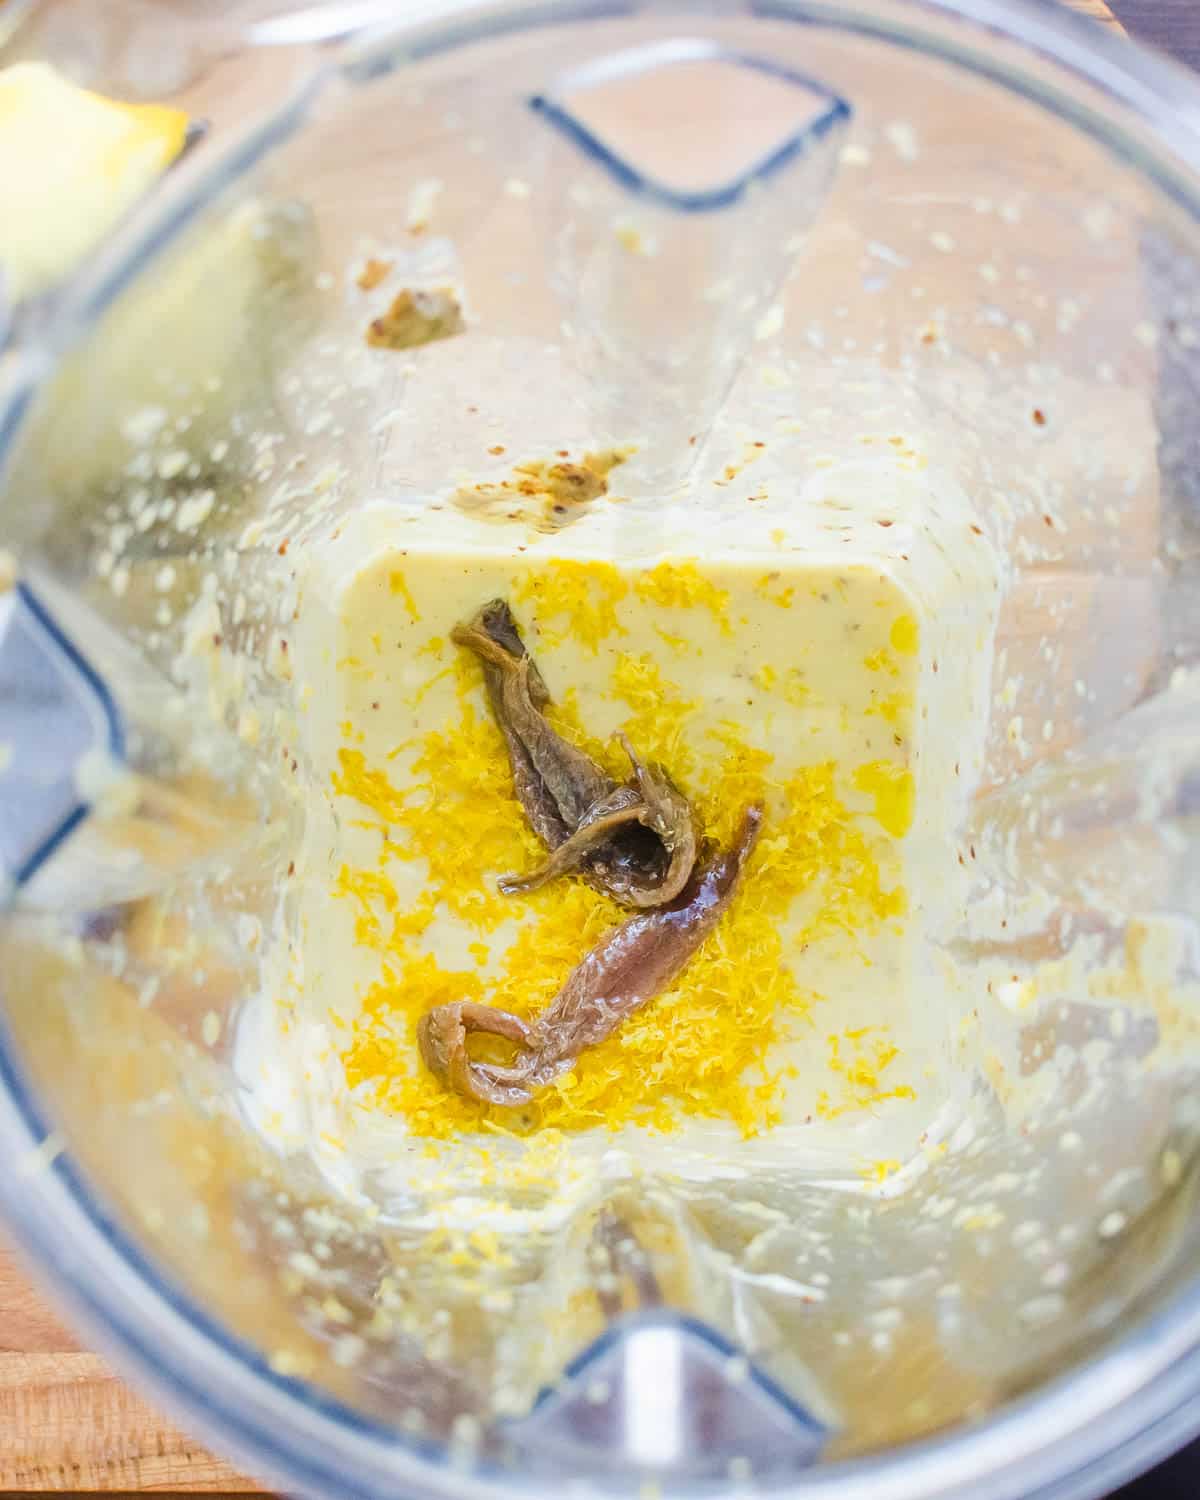 Season the dressing with anchovies and lemon zest.